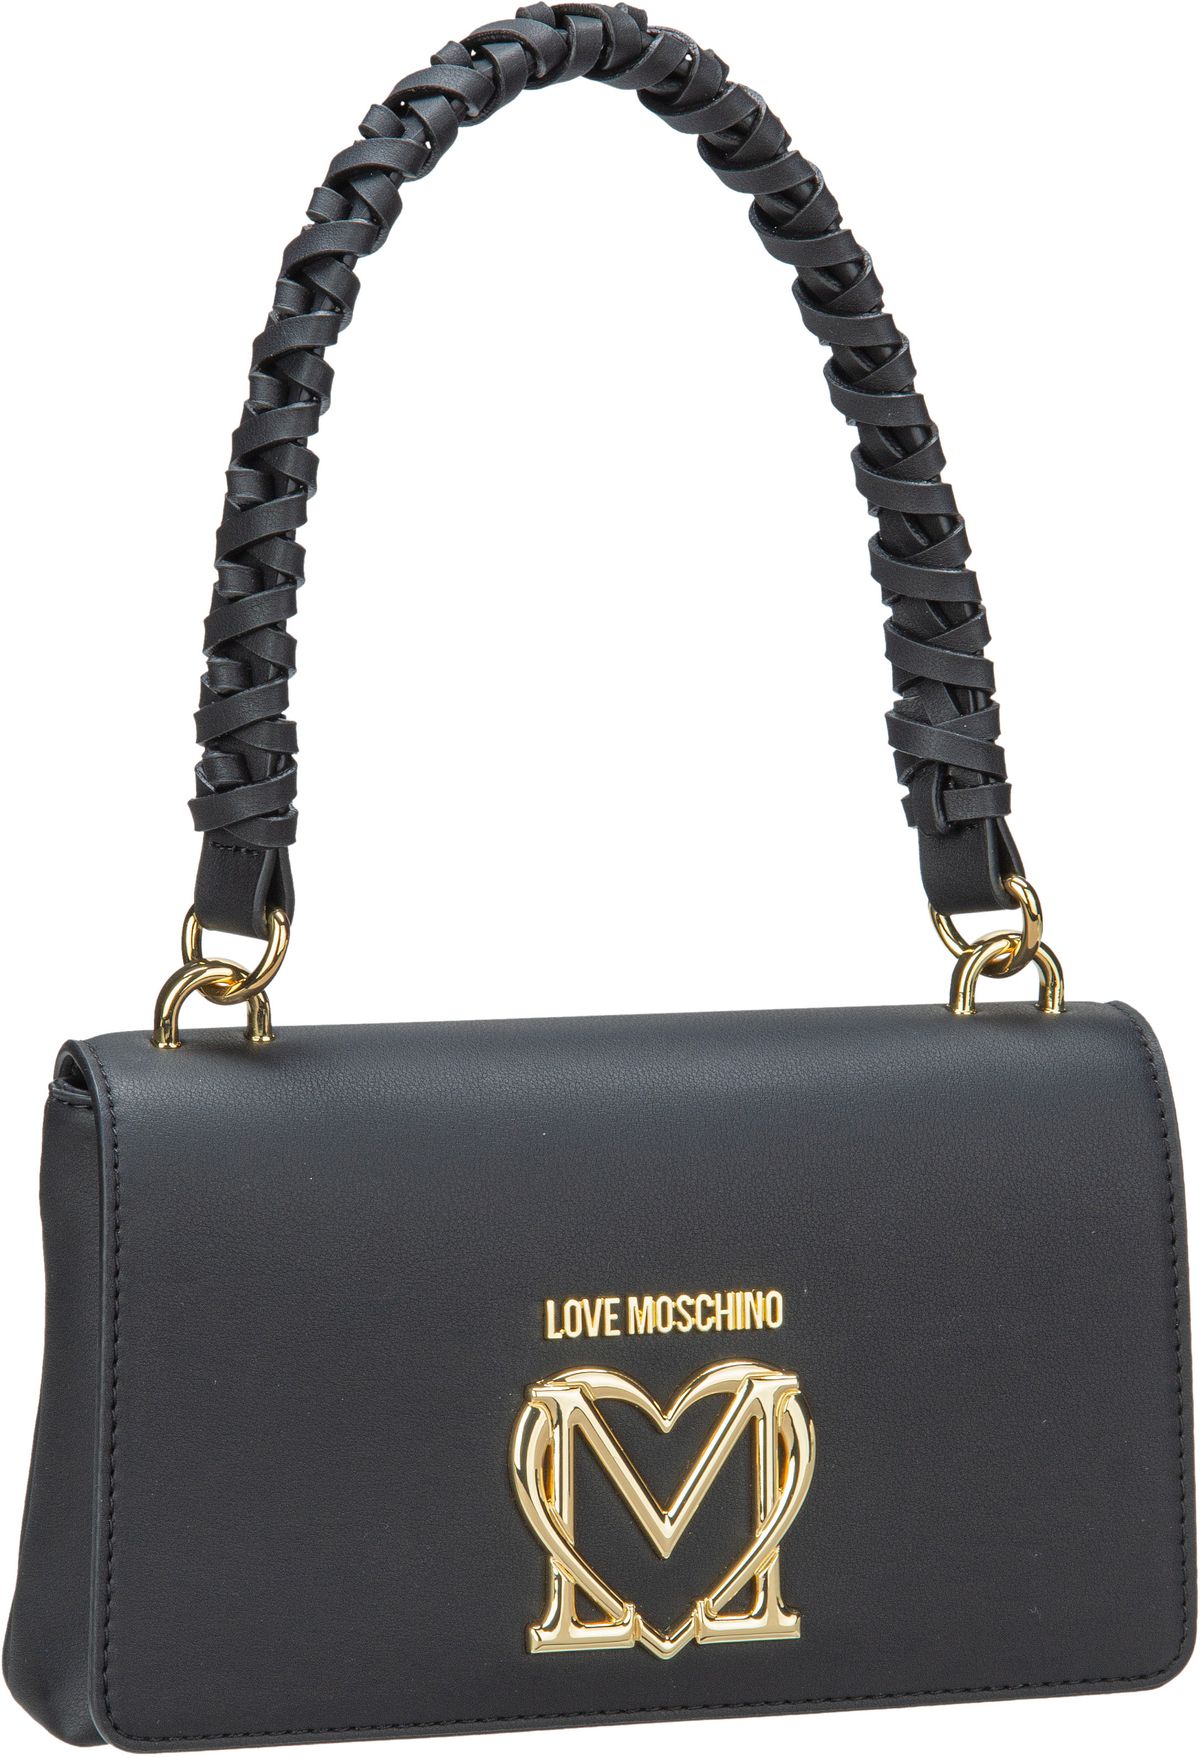 Love Moschino Love Embroidery Bag 4377 - Black